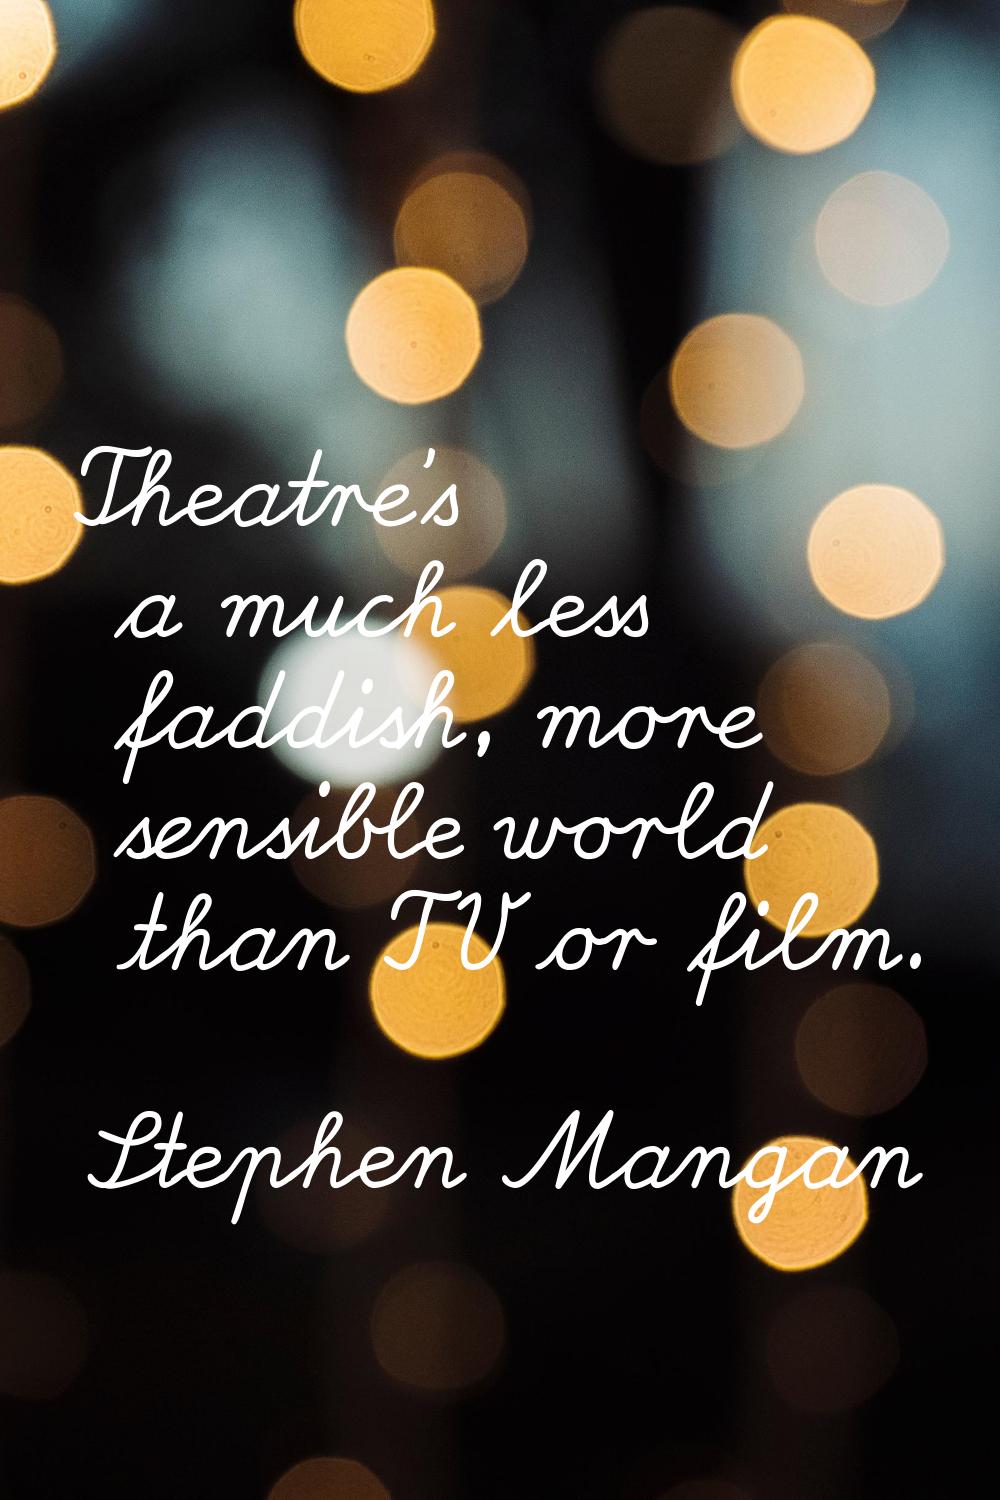 Theatre's a much less faddish, more sensible world than TV or film.